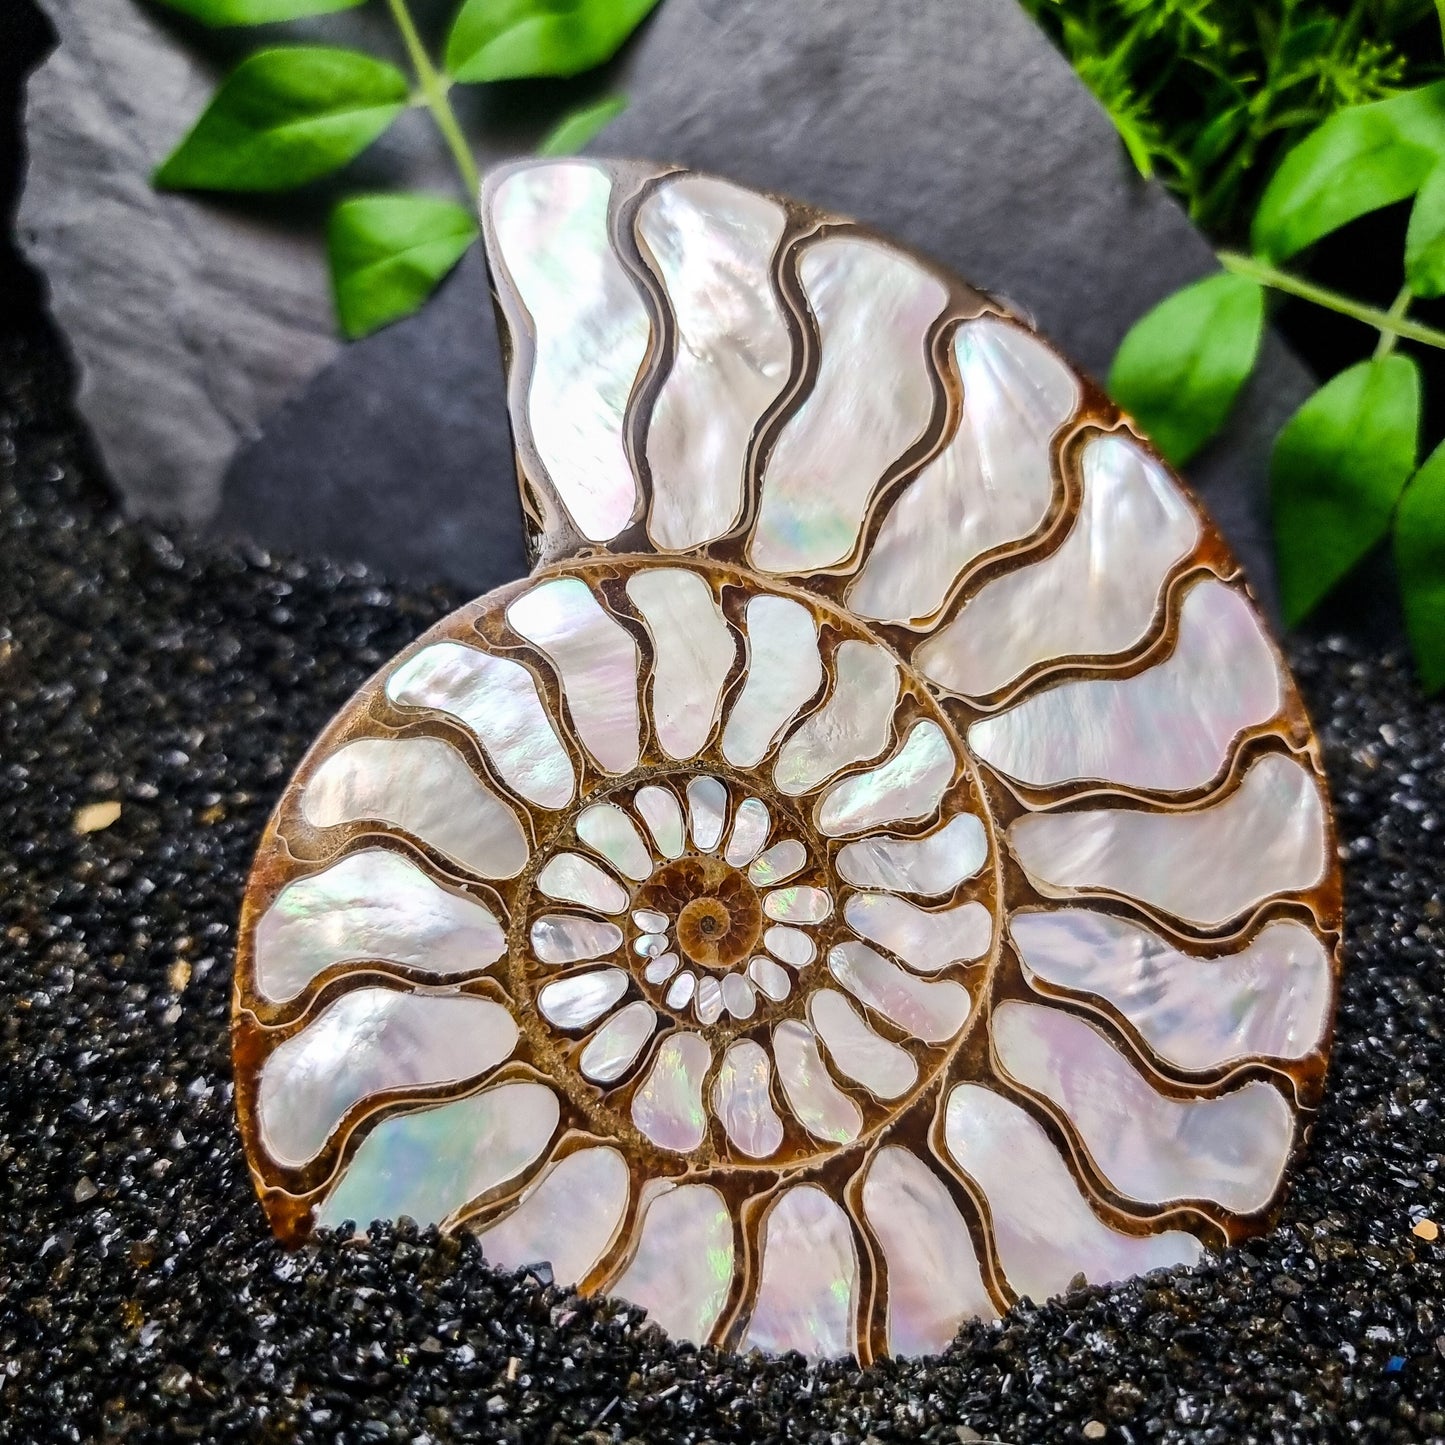 Ammonite Shell with Mother of Pearl Inlay